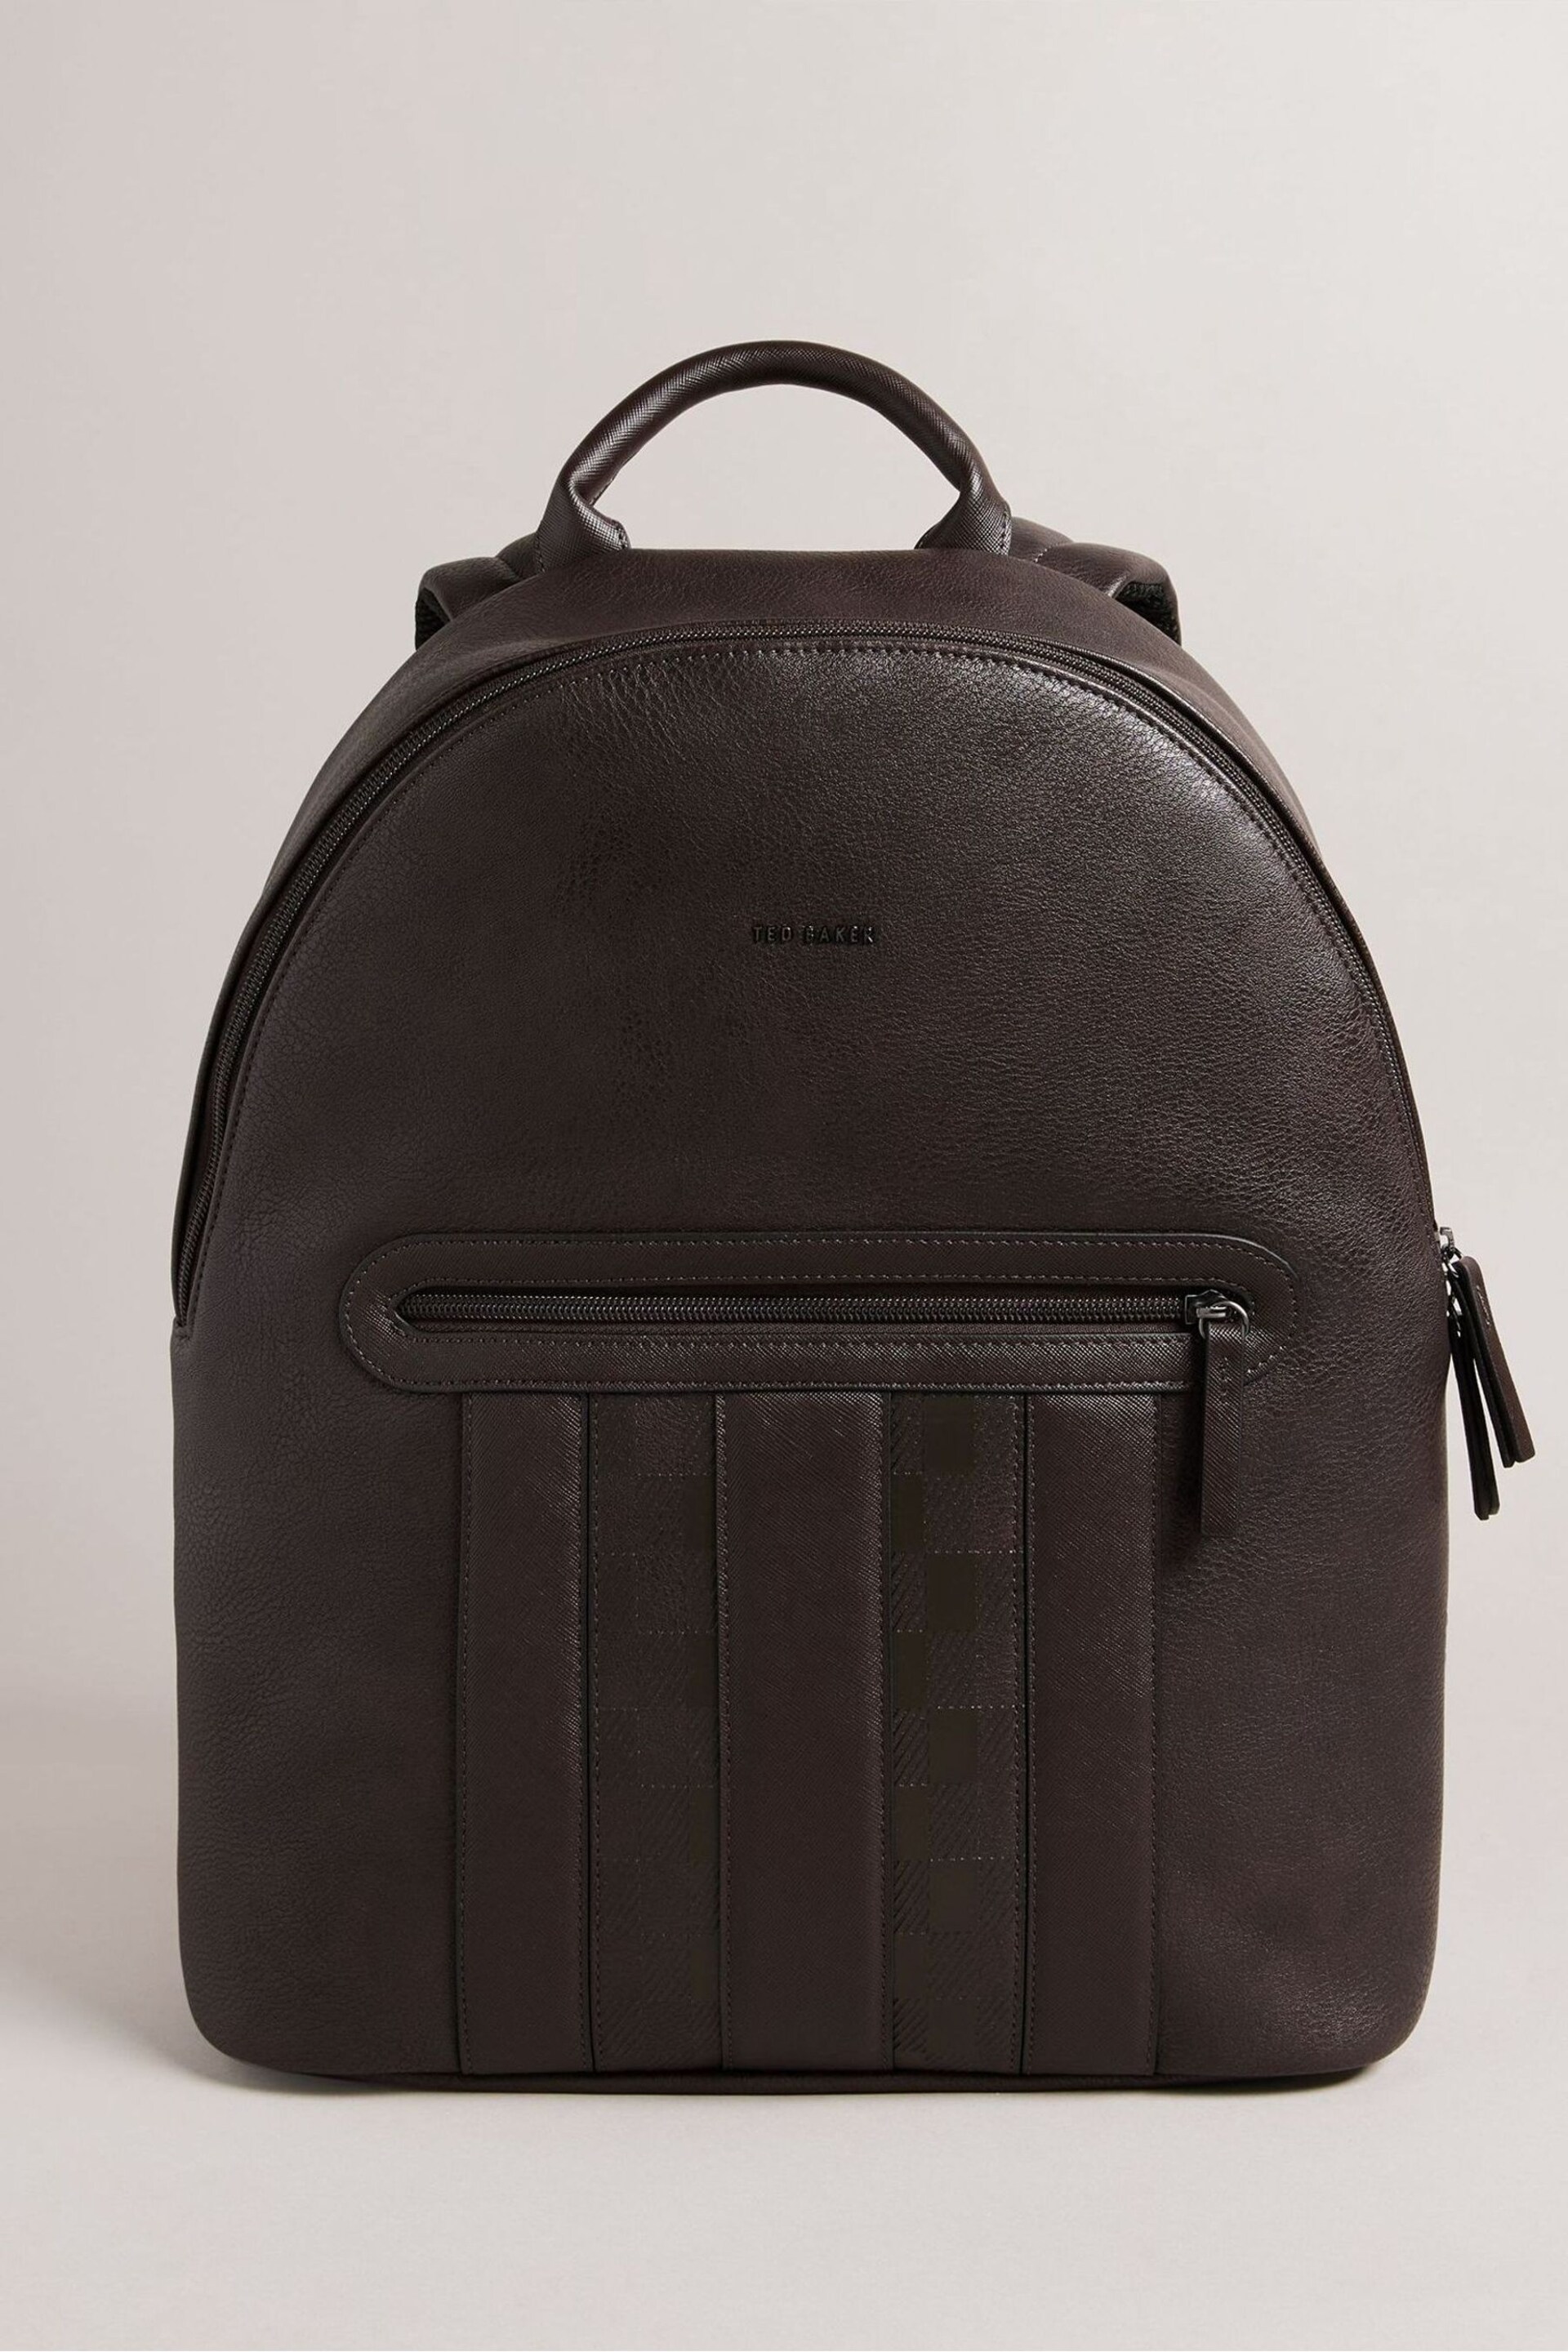 Ted Baker Brown Waynor House Check PU Backpack - Image 1 of 4